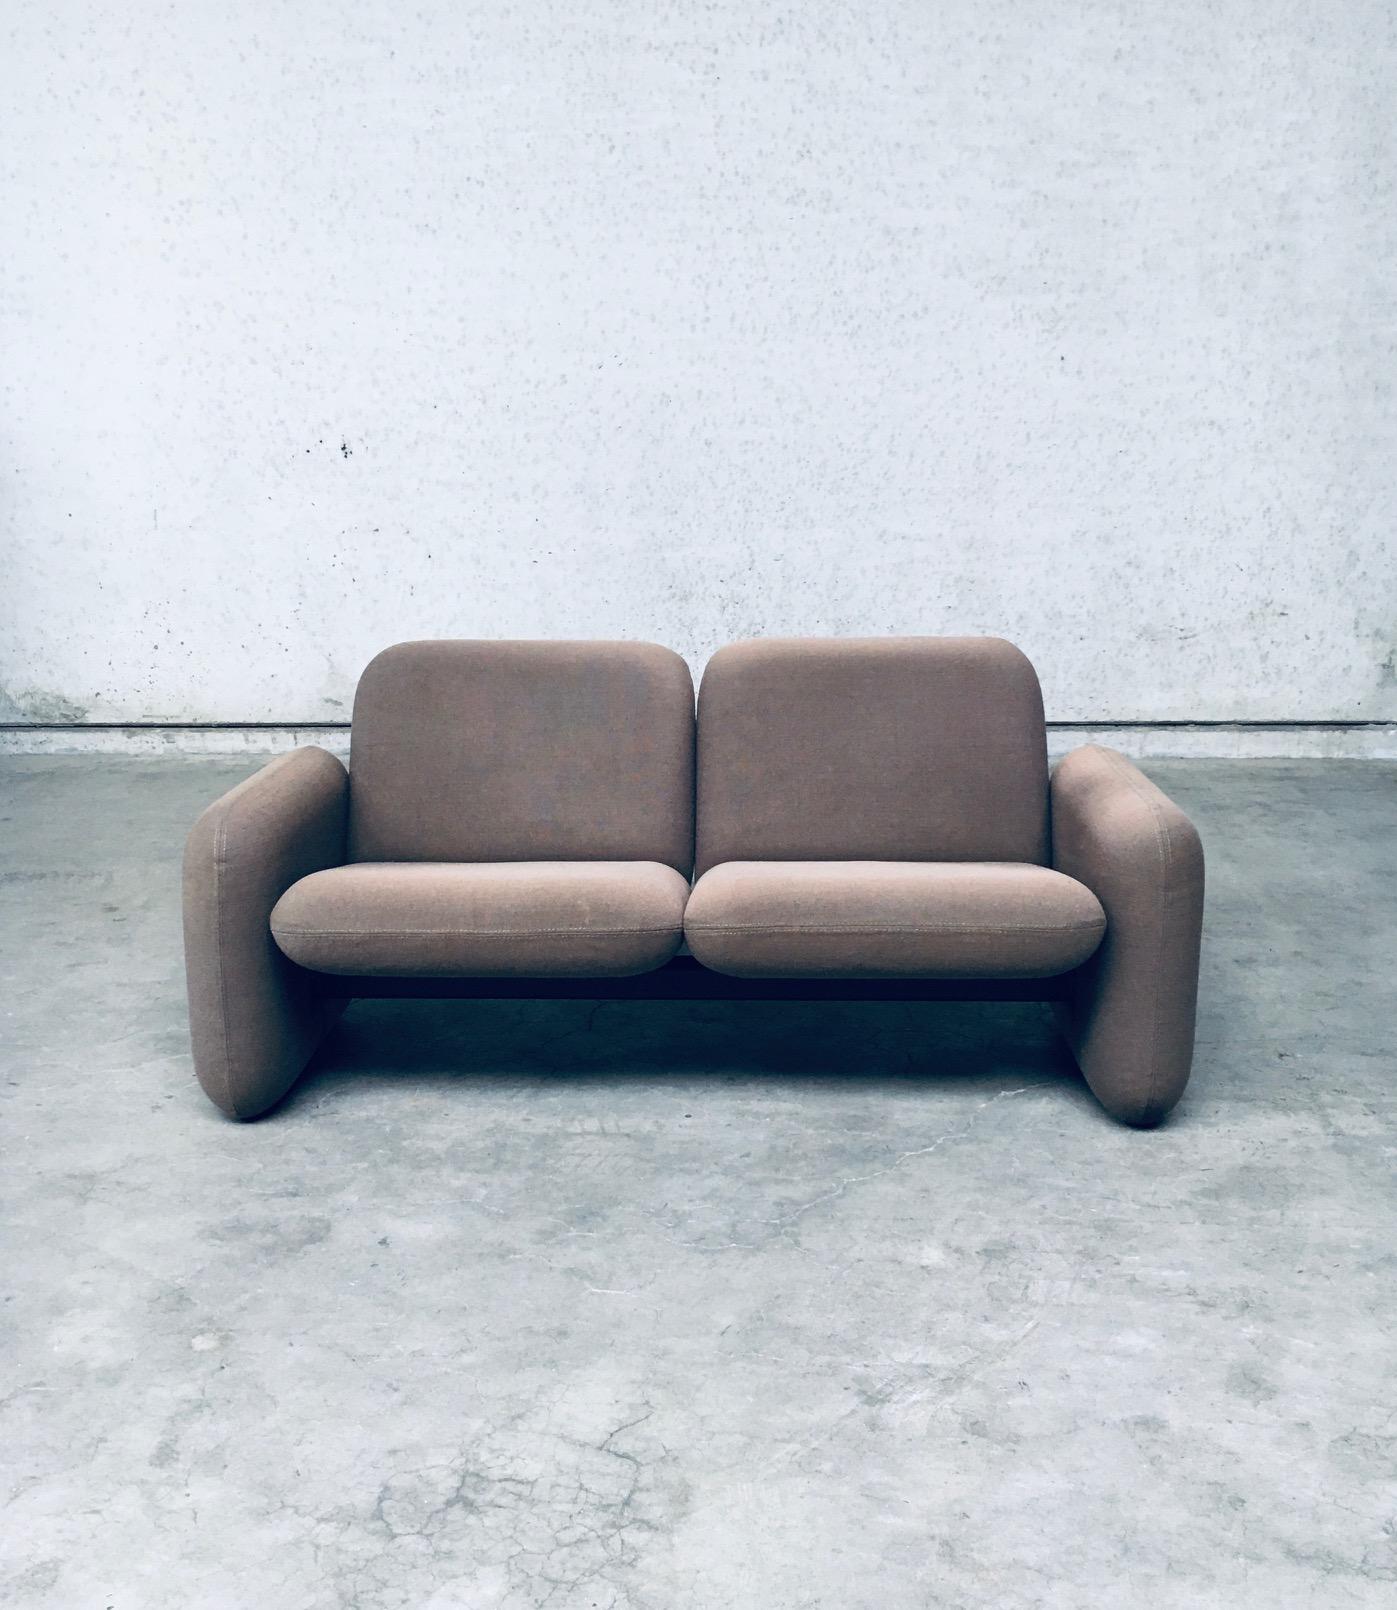 Metal Vintage Iconic 1970s Chiclet Sofa by Ray Wilkes for Herman Miller